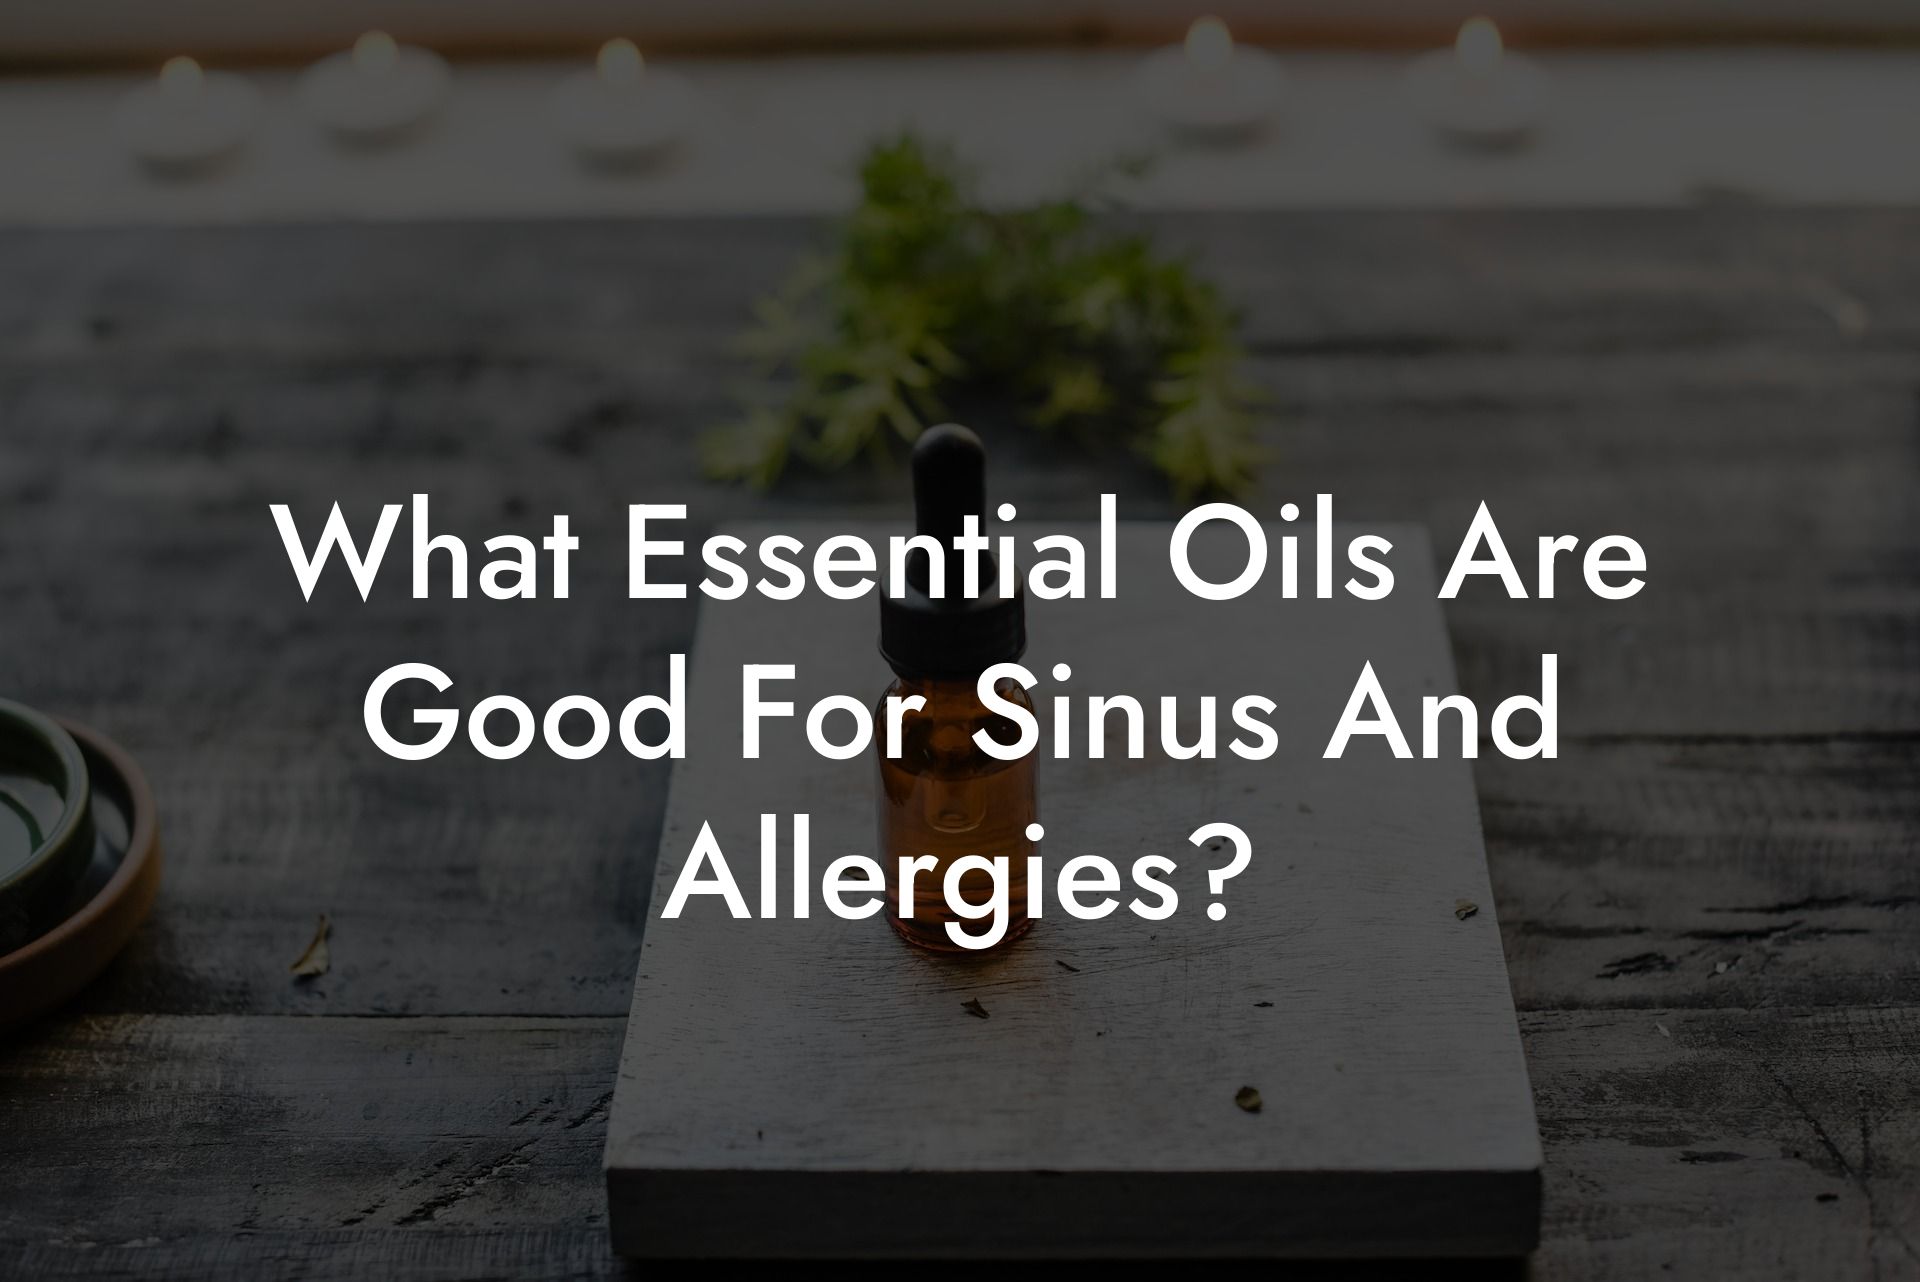 What Essential Oils Are Good For Sinus And Allergies?